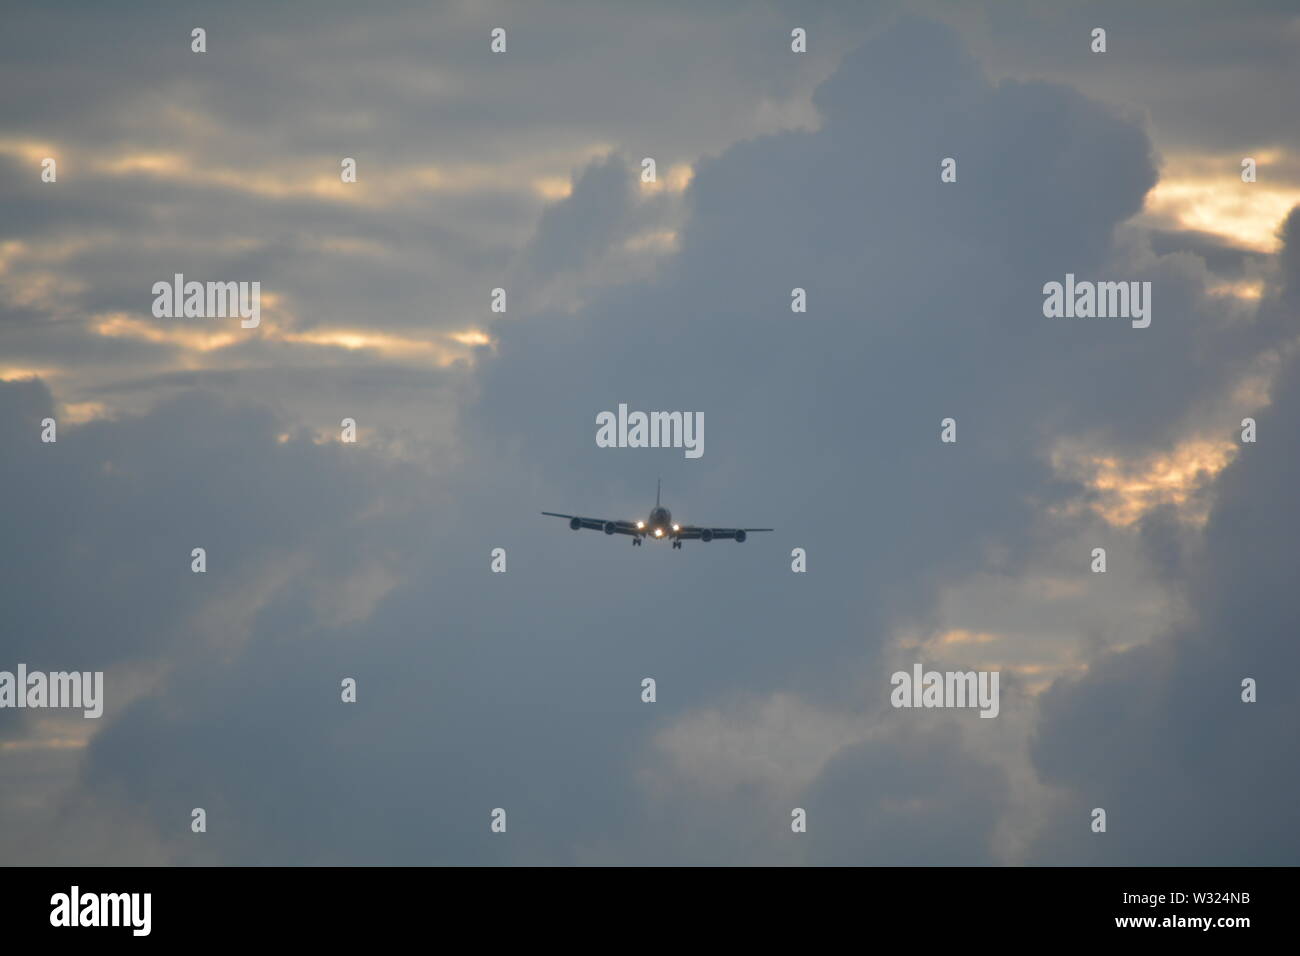 KC 135 aircraft on landing approach against a pastel coloured evening cloud bank Stock Photo